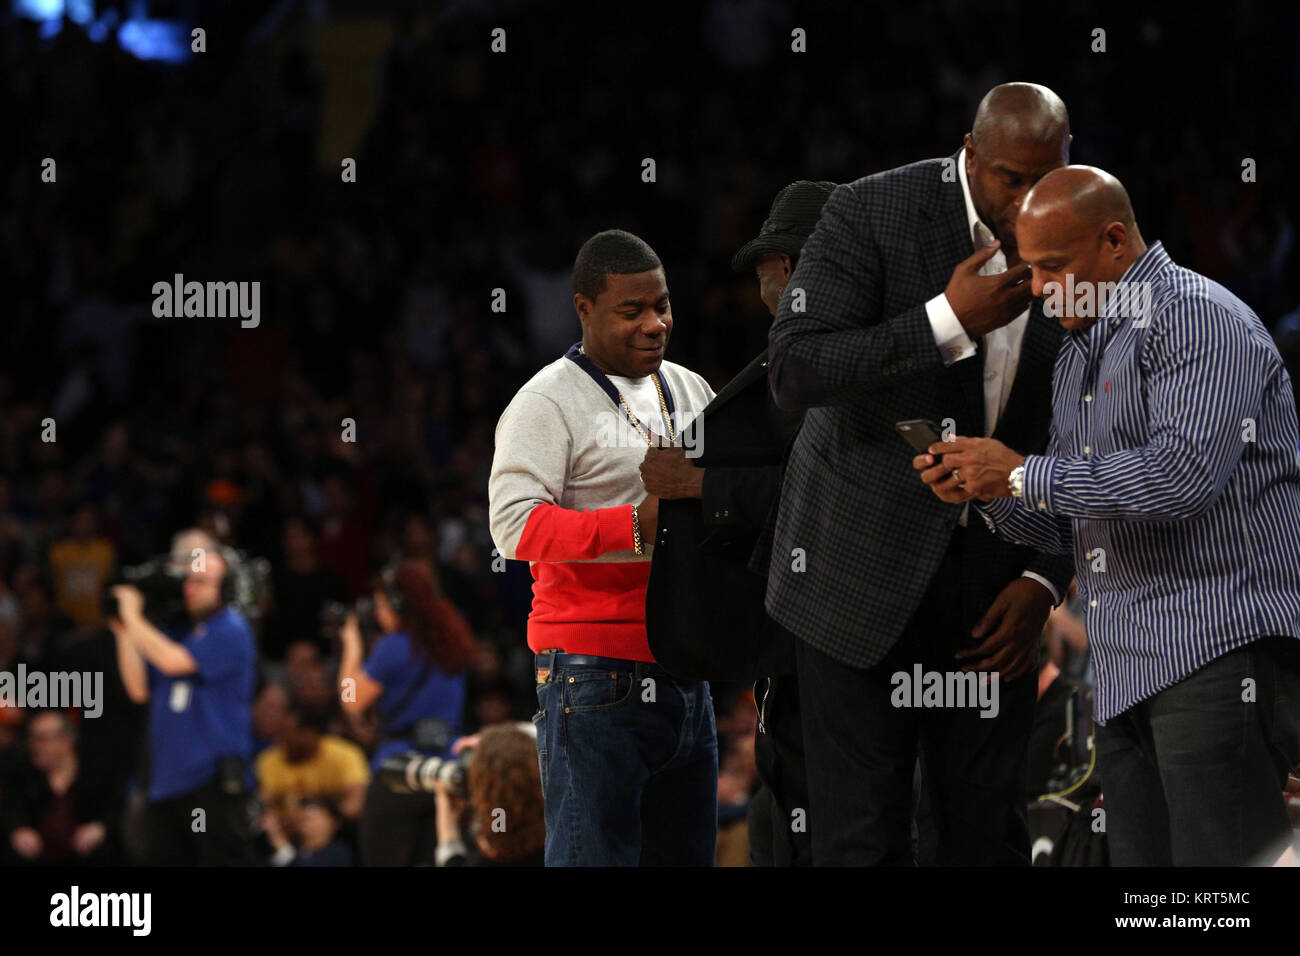 NEW YORK, NY - NOVEMBER 08: (Embargoed till November 10, 2015) Magic Johnson, Tracy Morgan with wife Megan Wollover sit with Michael K. Williams and  Director Spike Lee at the New York Knicks vs Los Angeles Lakers game at Madison Square Garden on November 8, 2015 in New York City.   People:  Tracy Morgan, Michael K. Williams Stock Photo